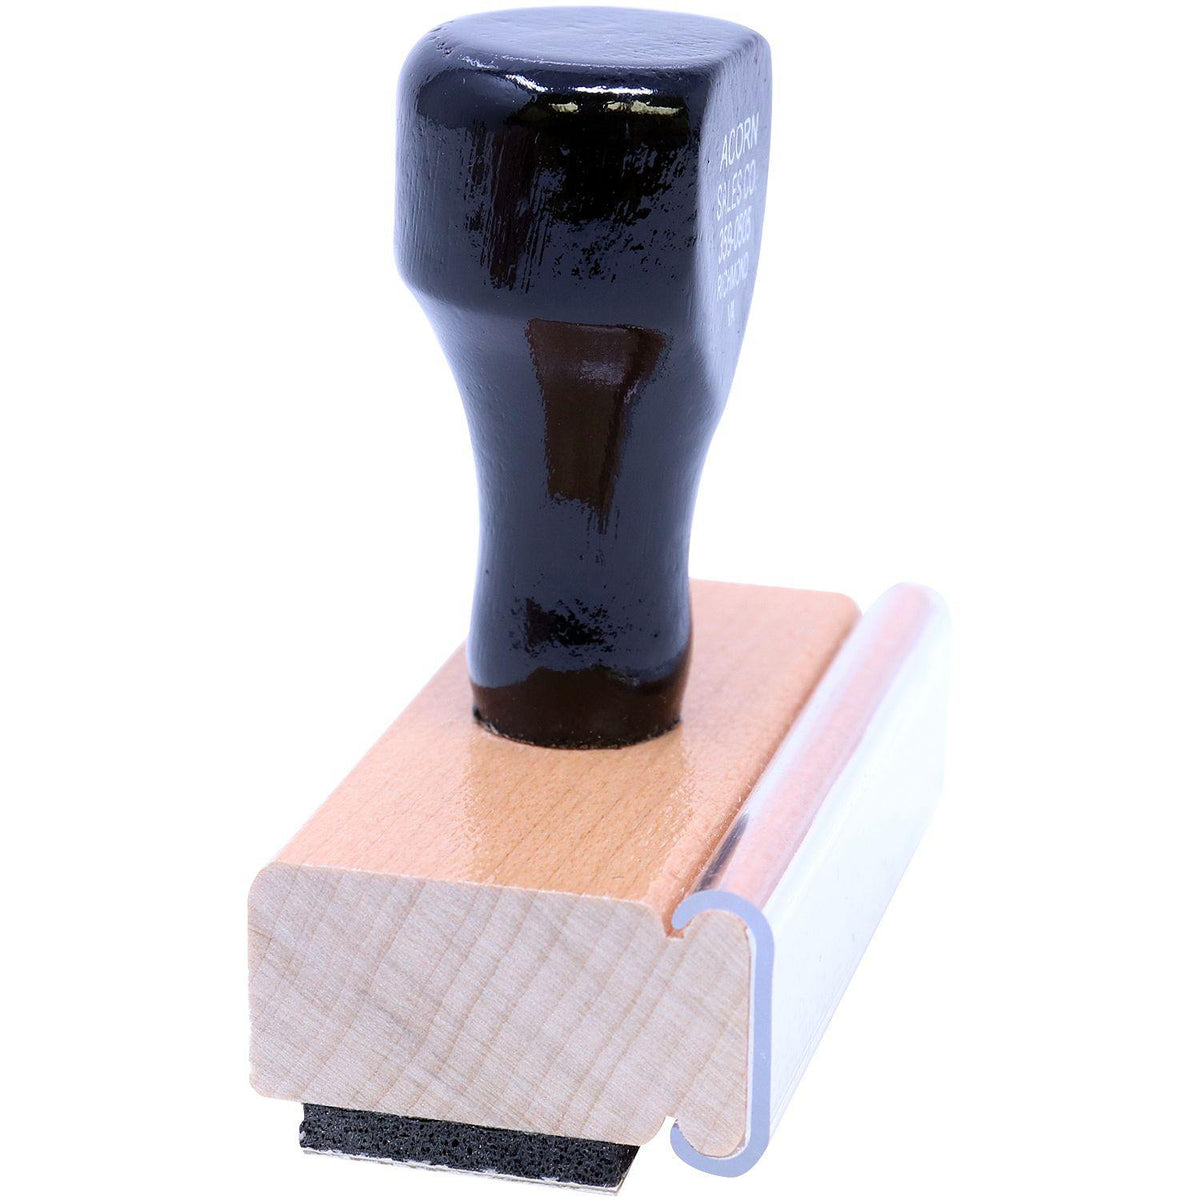 Large Your Work is Out of this world Rubber Stamp - Engineer Seal Stamps - Brand_Acorn, Impression Size_Large, Stamp Type_Regular Stamp, Type of Use_Teacher